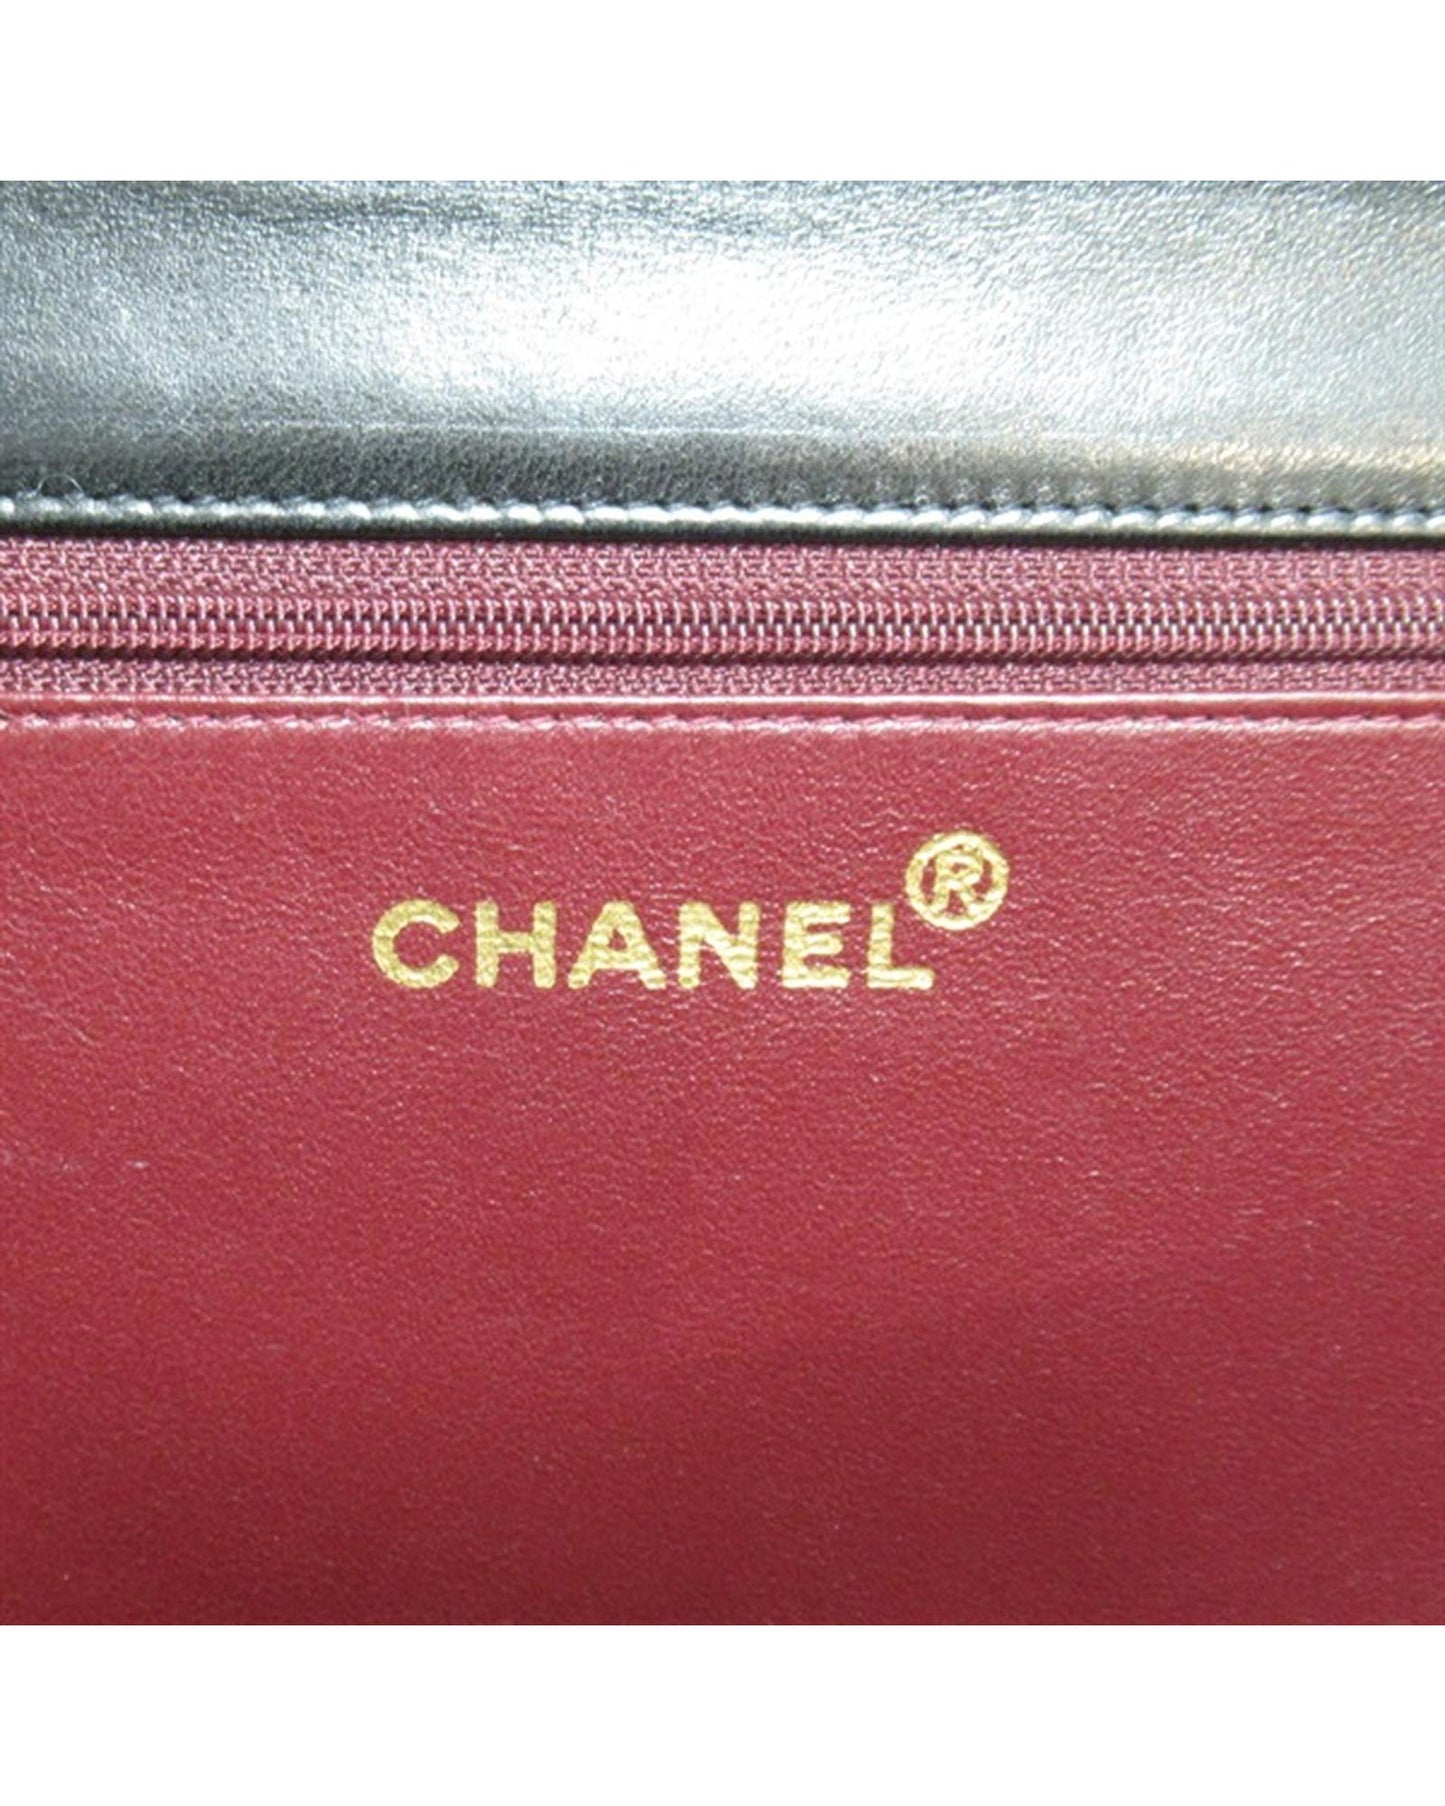 Chanel Women's Black Chanel Medium Classic Single Flap Bag in Excellent Condition in Black